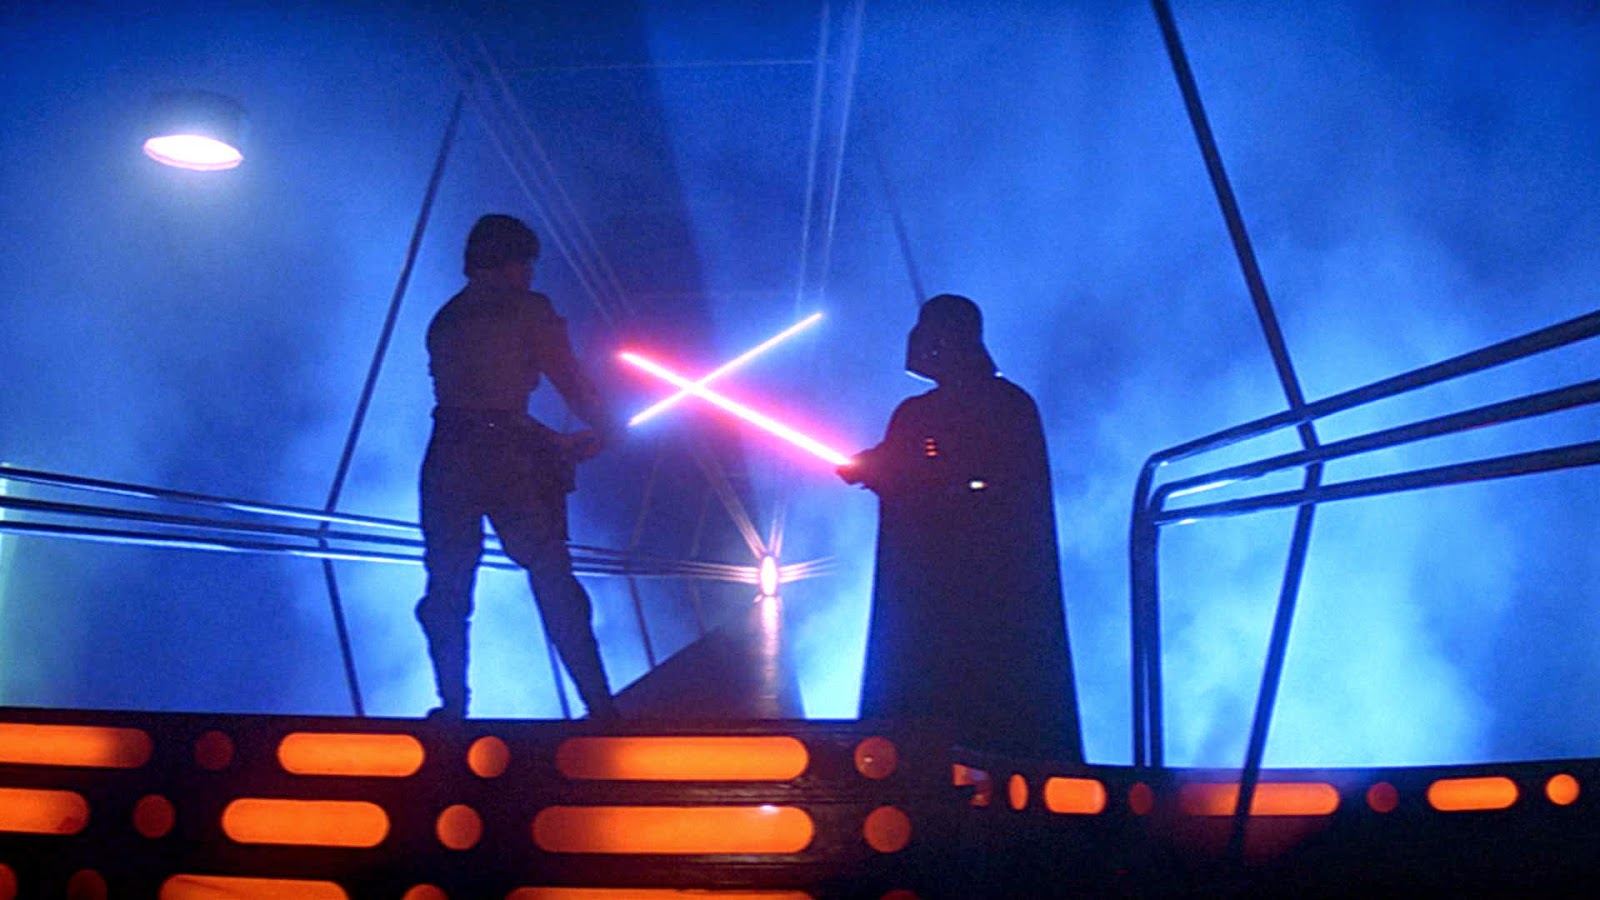 Creature Cast: Why I like the ending lightsaber battle in Empire Strikes Back